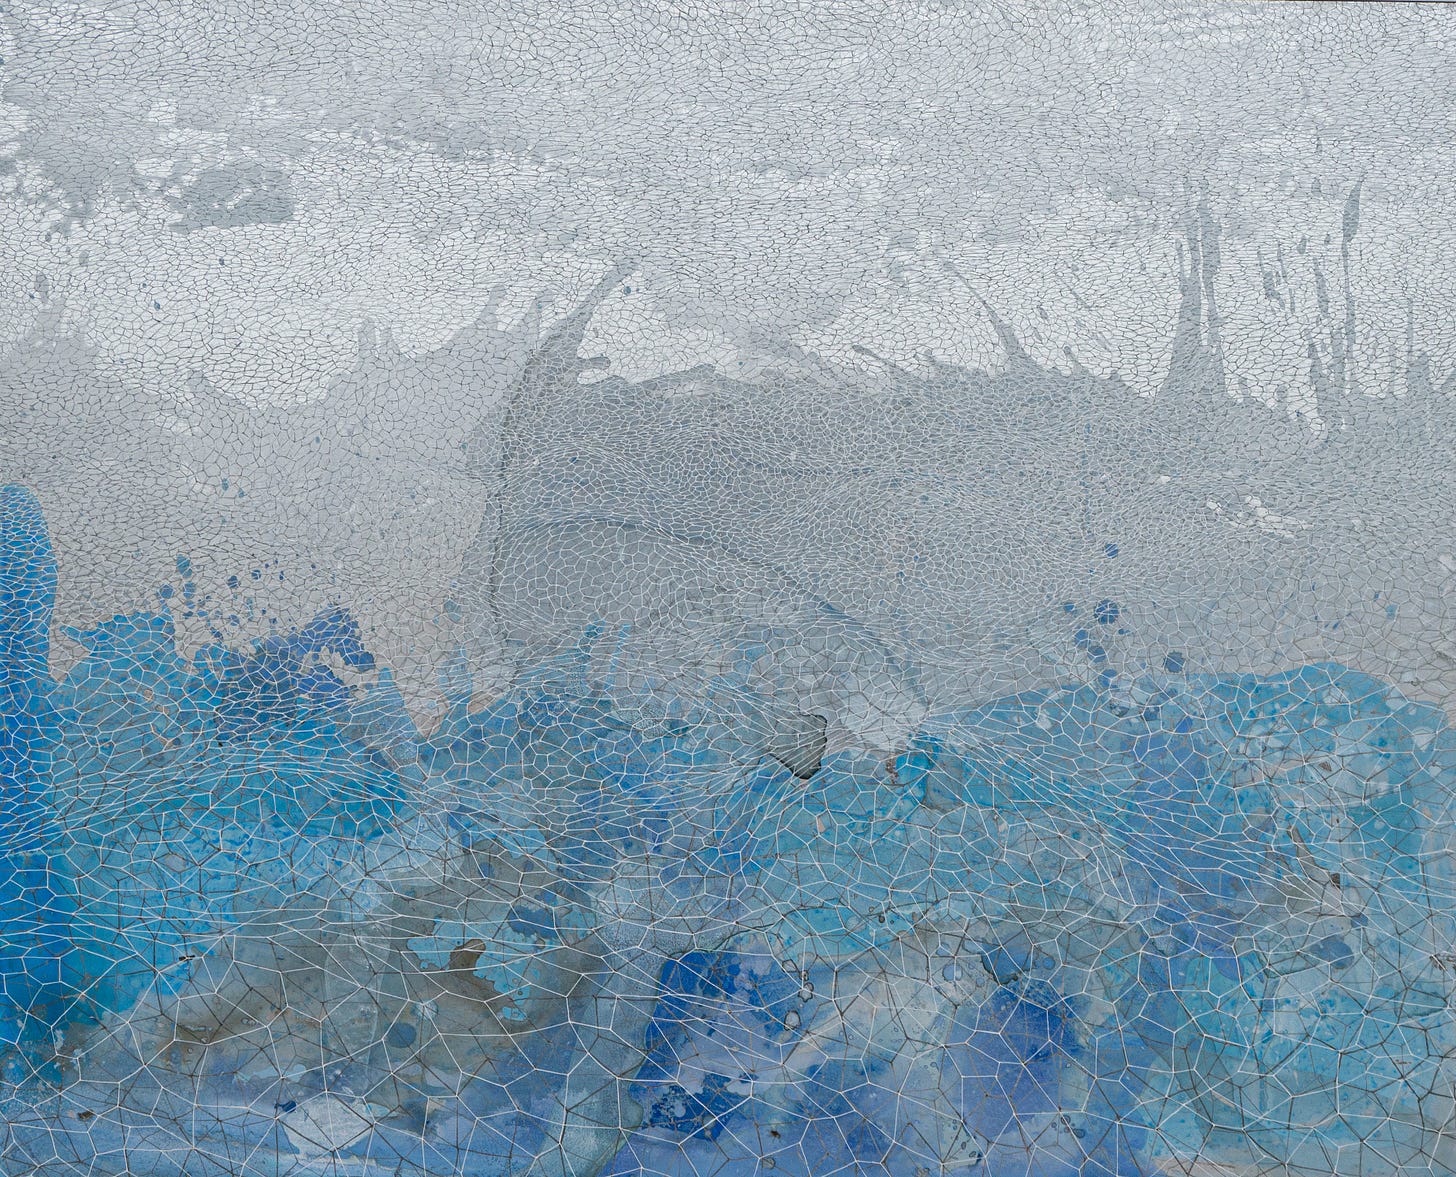 A painting of the surface of water with a network of intersecting lines